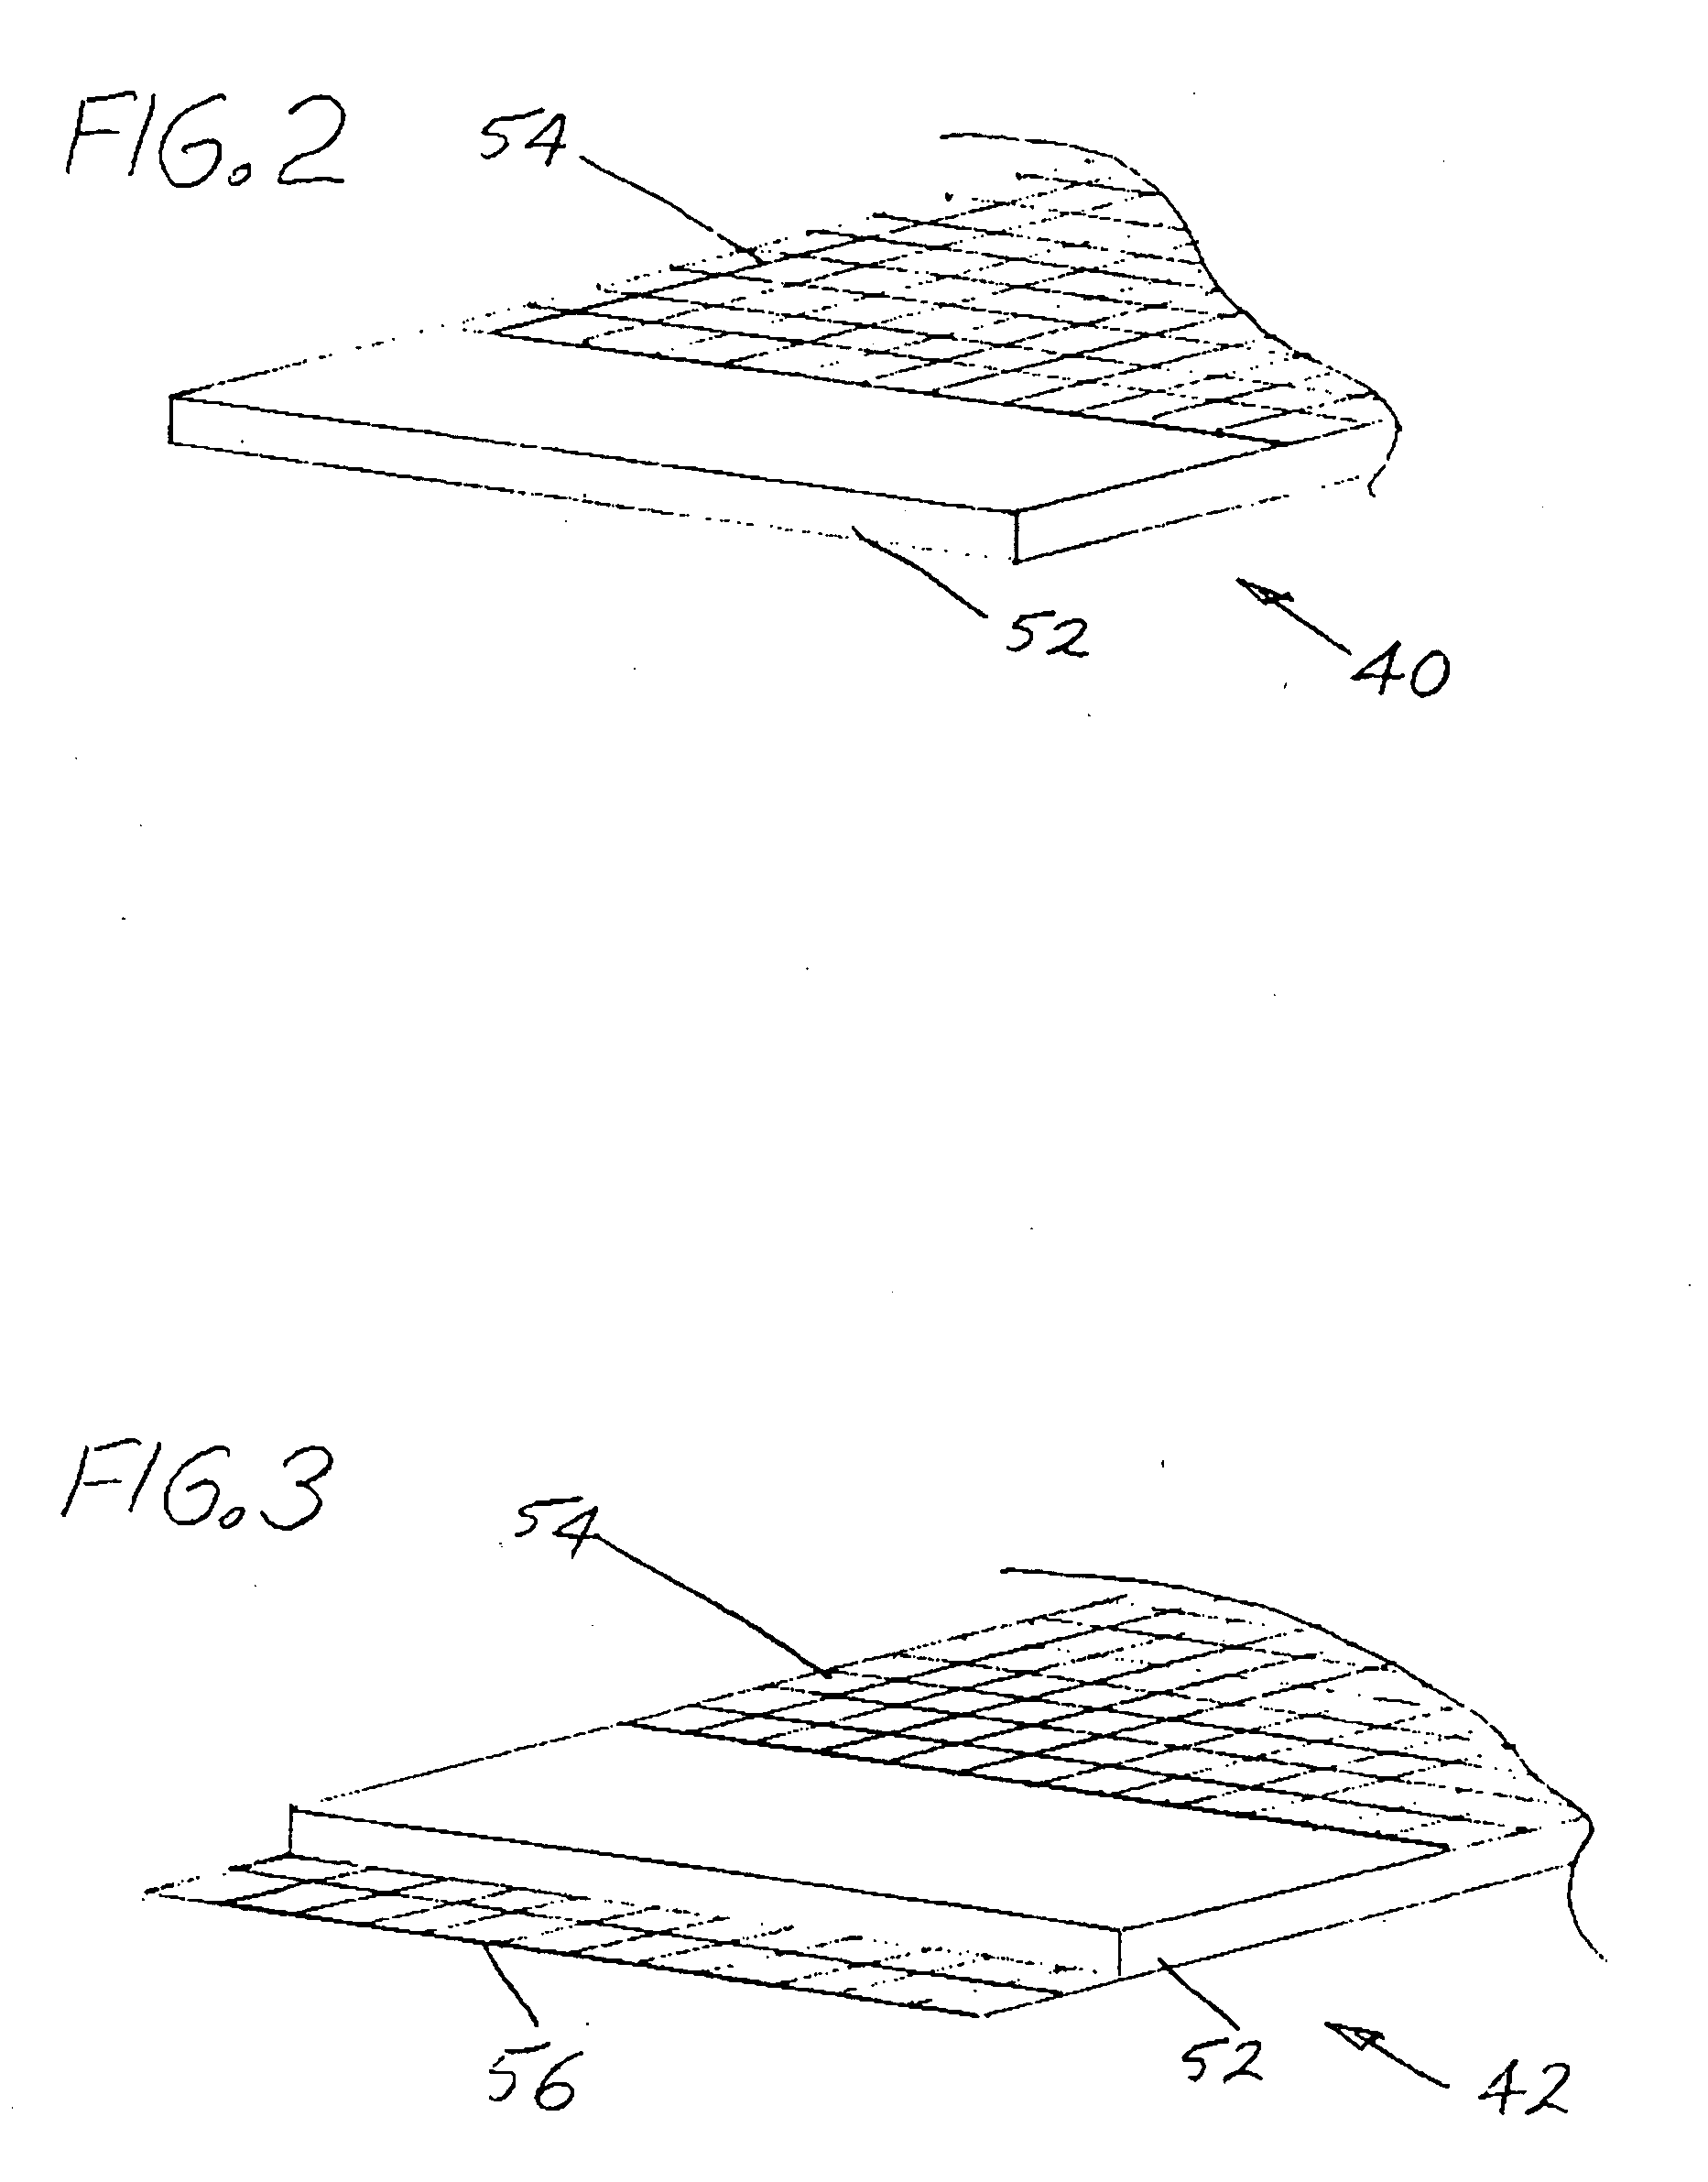 Polymer-based composite structural underlayment board and flooring system